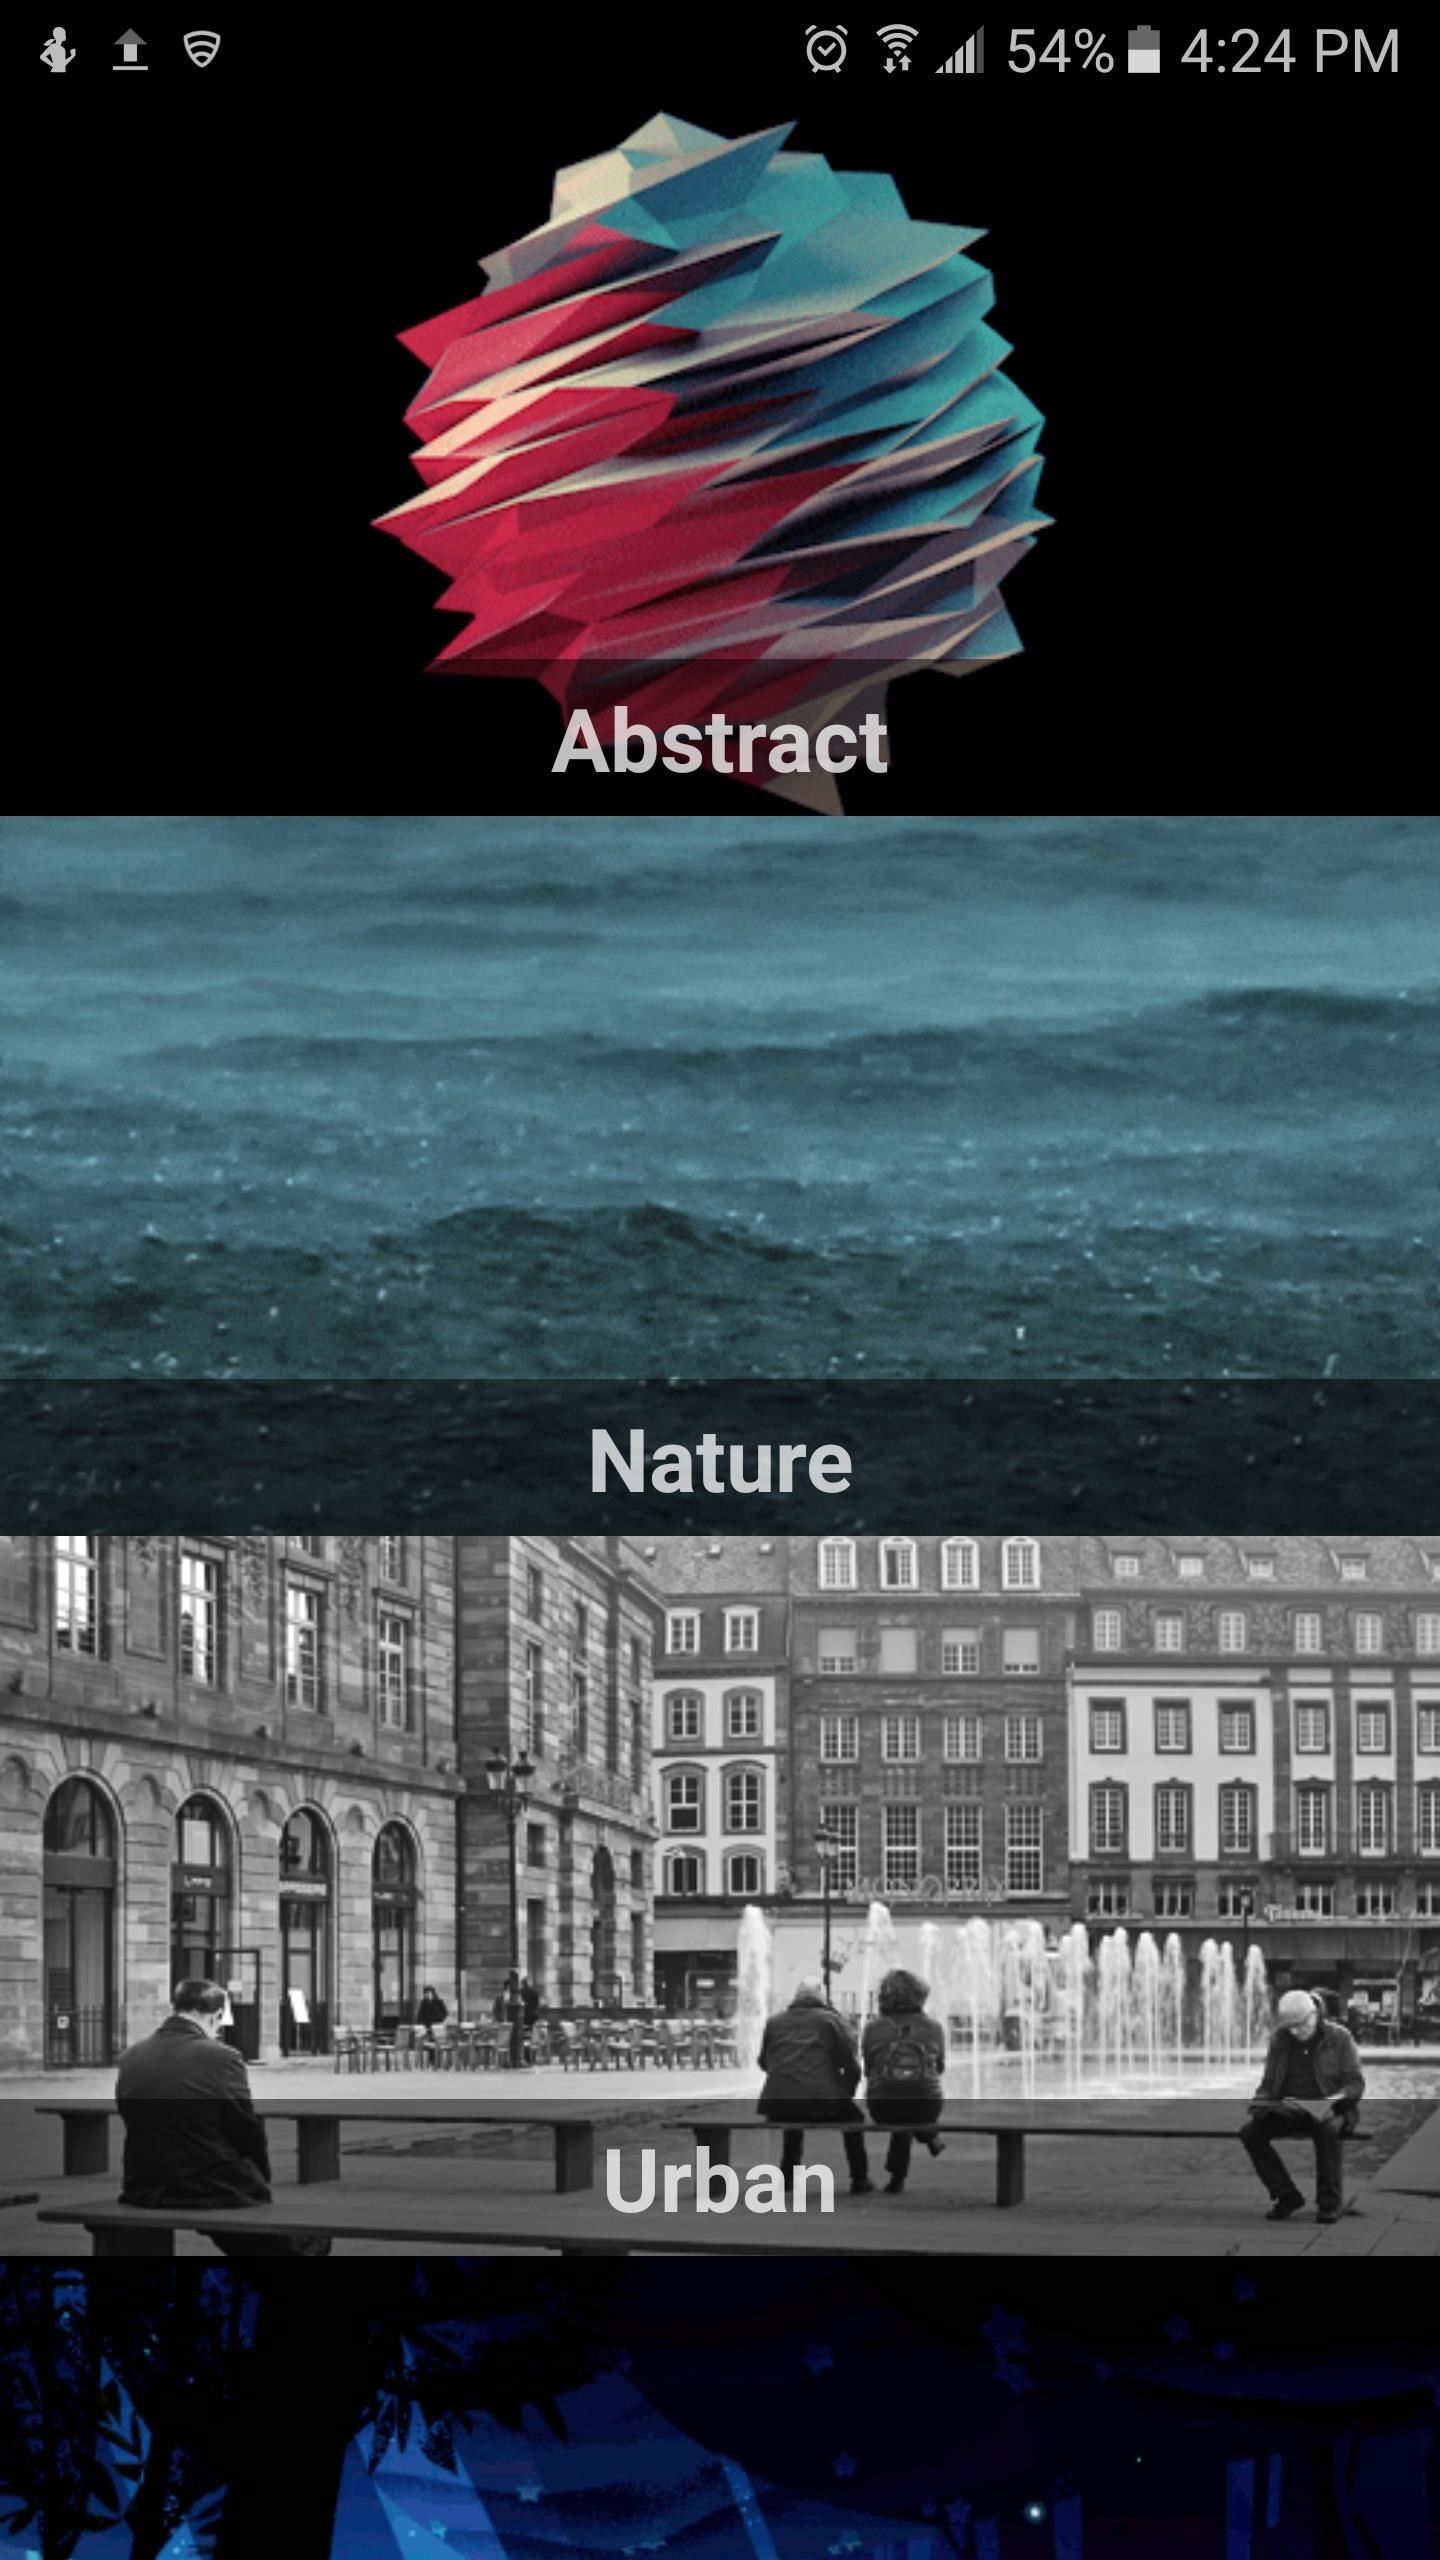 How to Get Moving Cinemagraph Wallpapers on Your Android's Home Screen